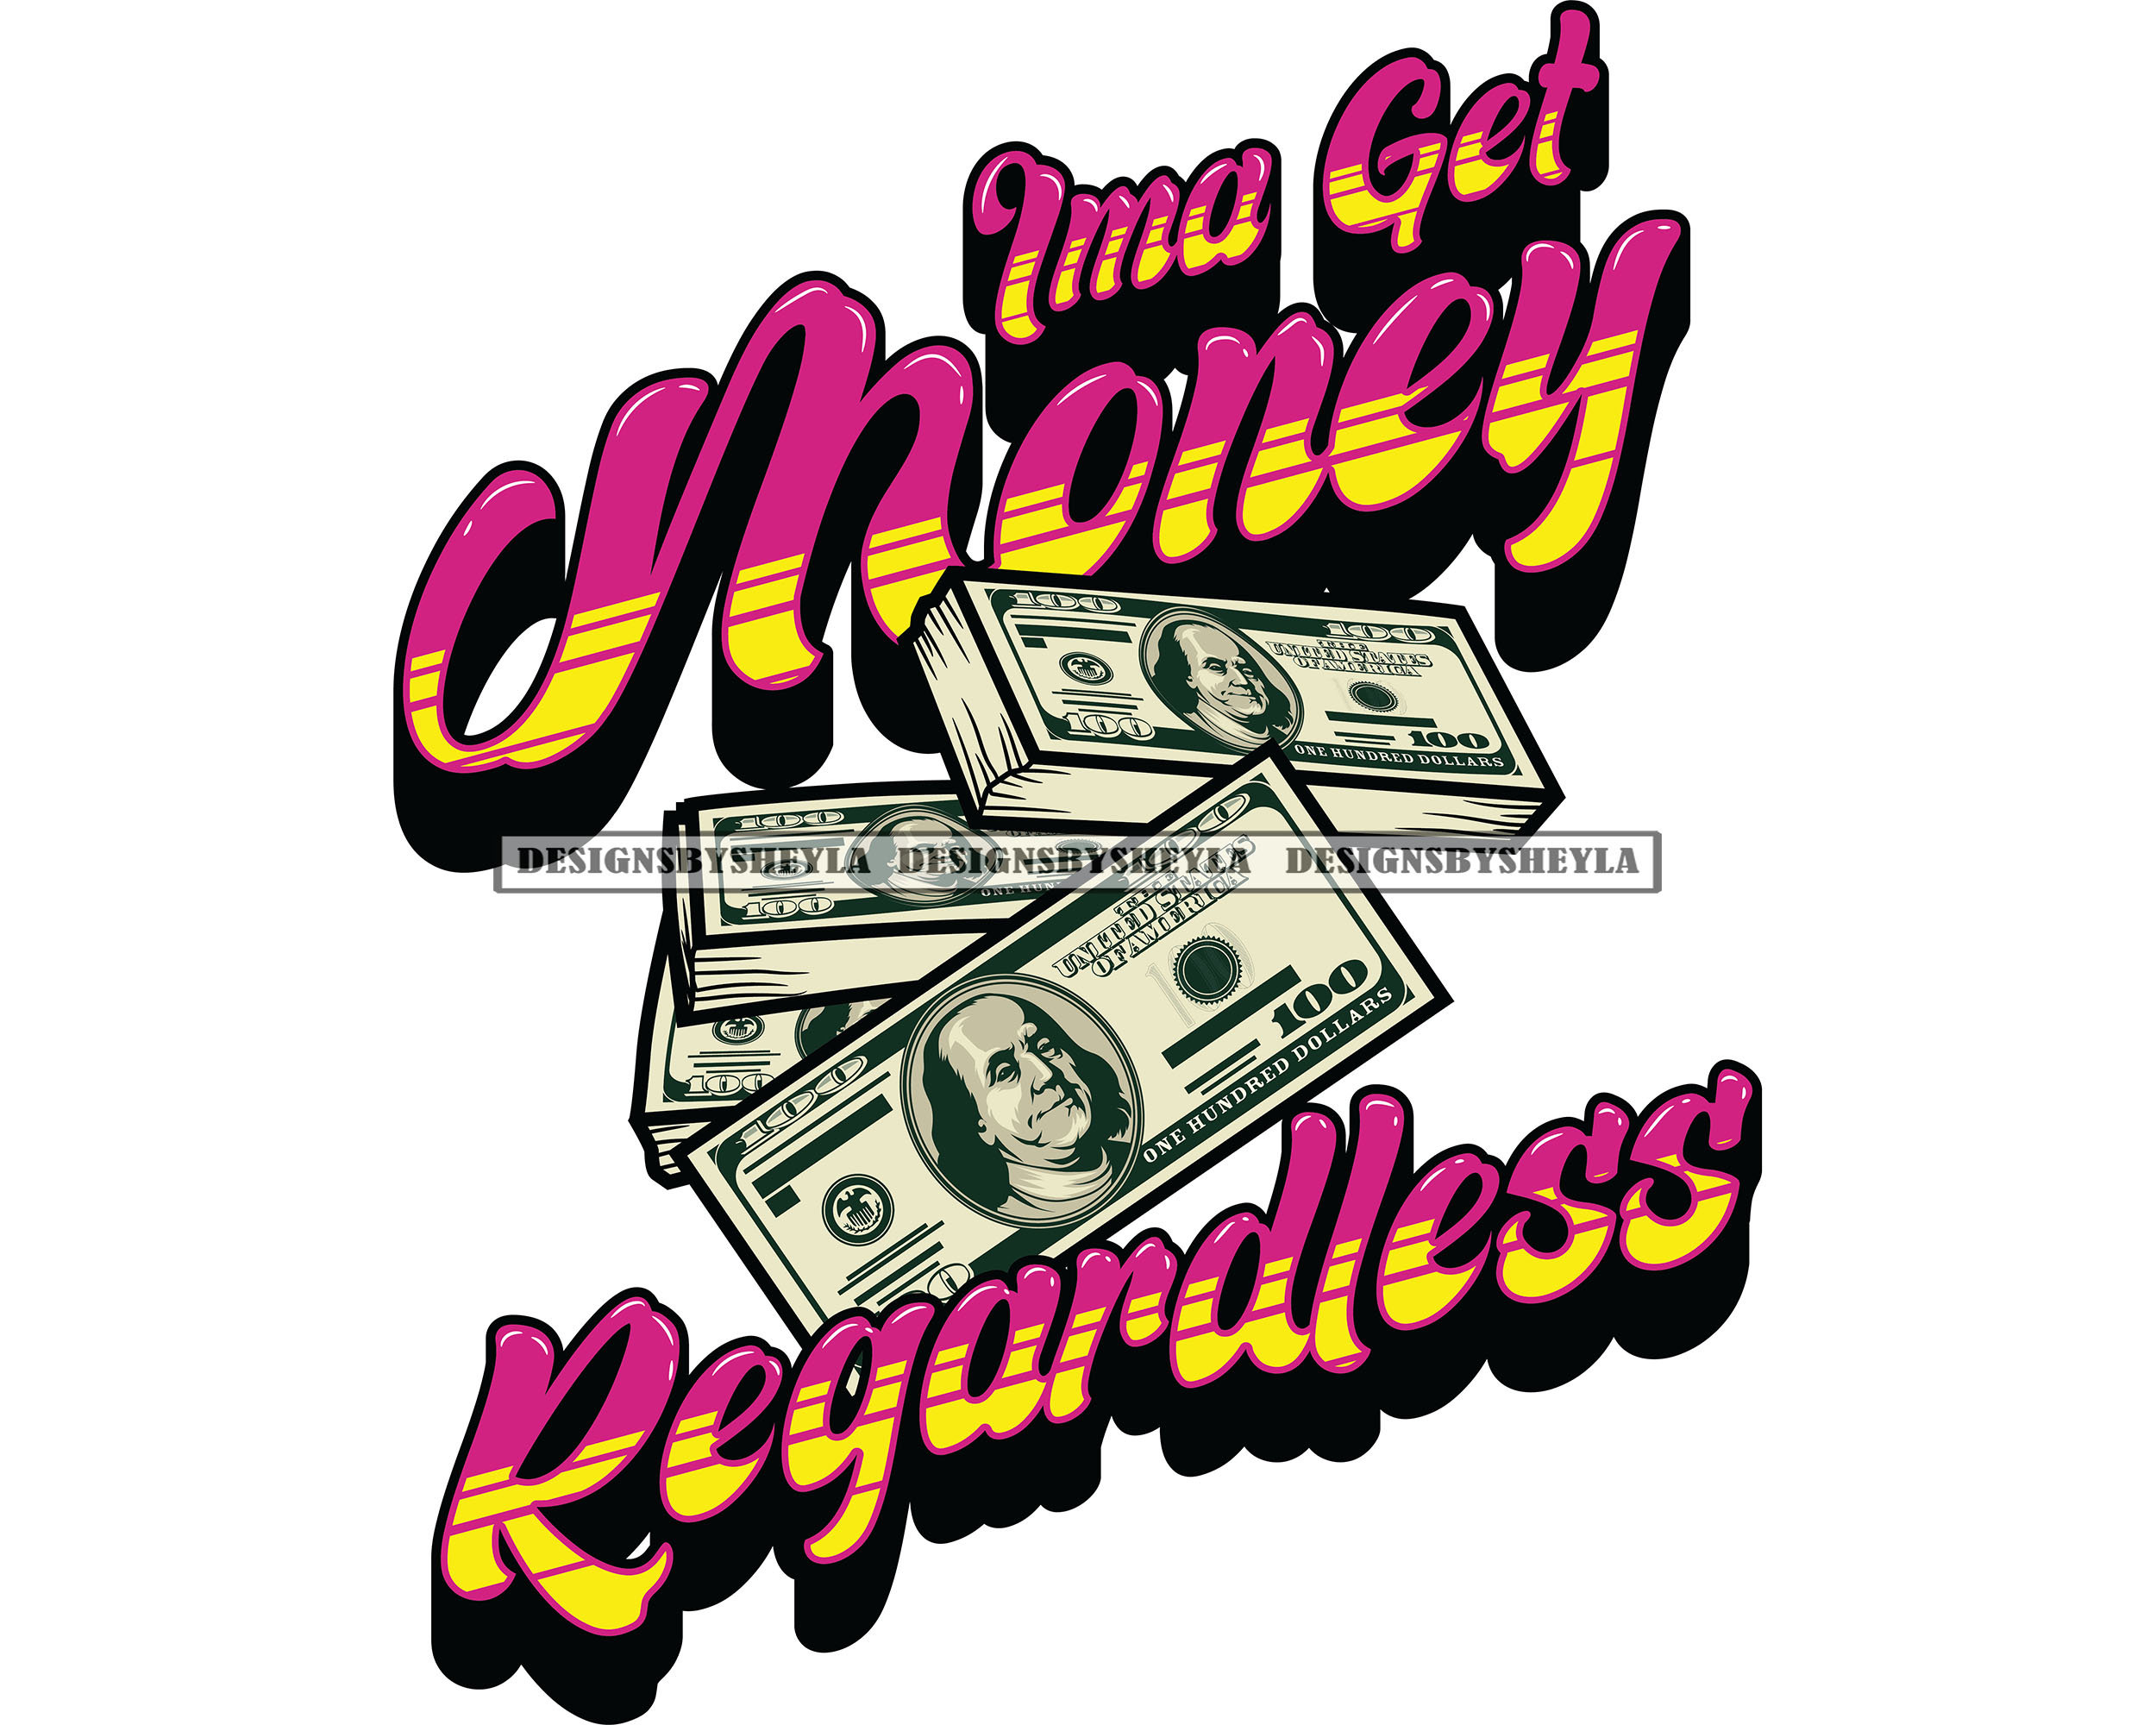 Checkers Purse Bag Full Of Paper Money Hustler Symbol Money Maker Currency  SVG JPG PNG Designs Vector Clipart Cricut Silhouette Cut Cutting